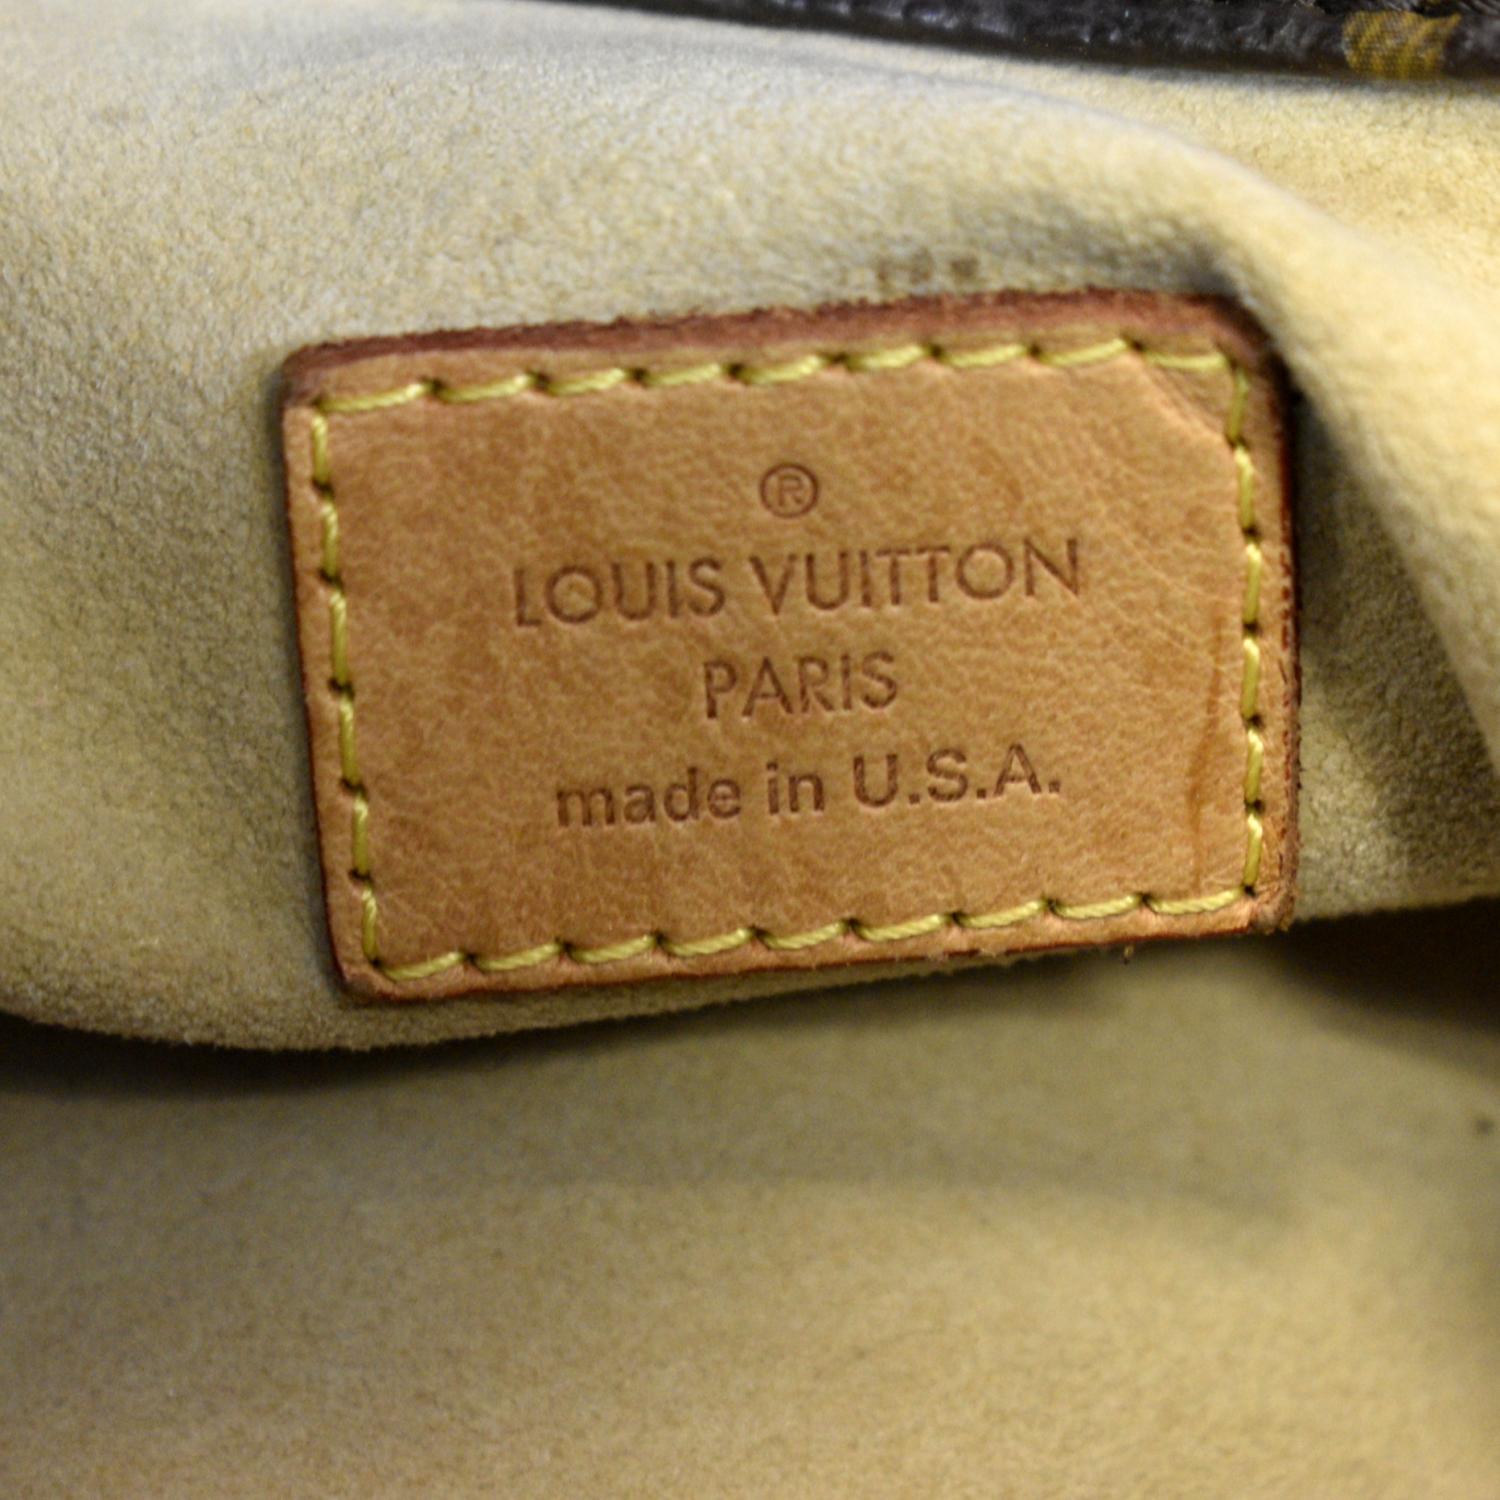 Are There Louis Vuitton Bags Made In Usa